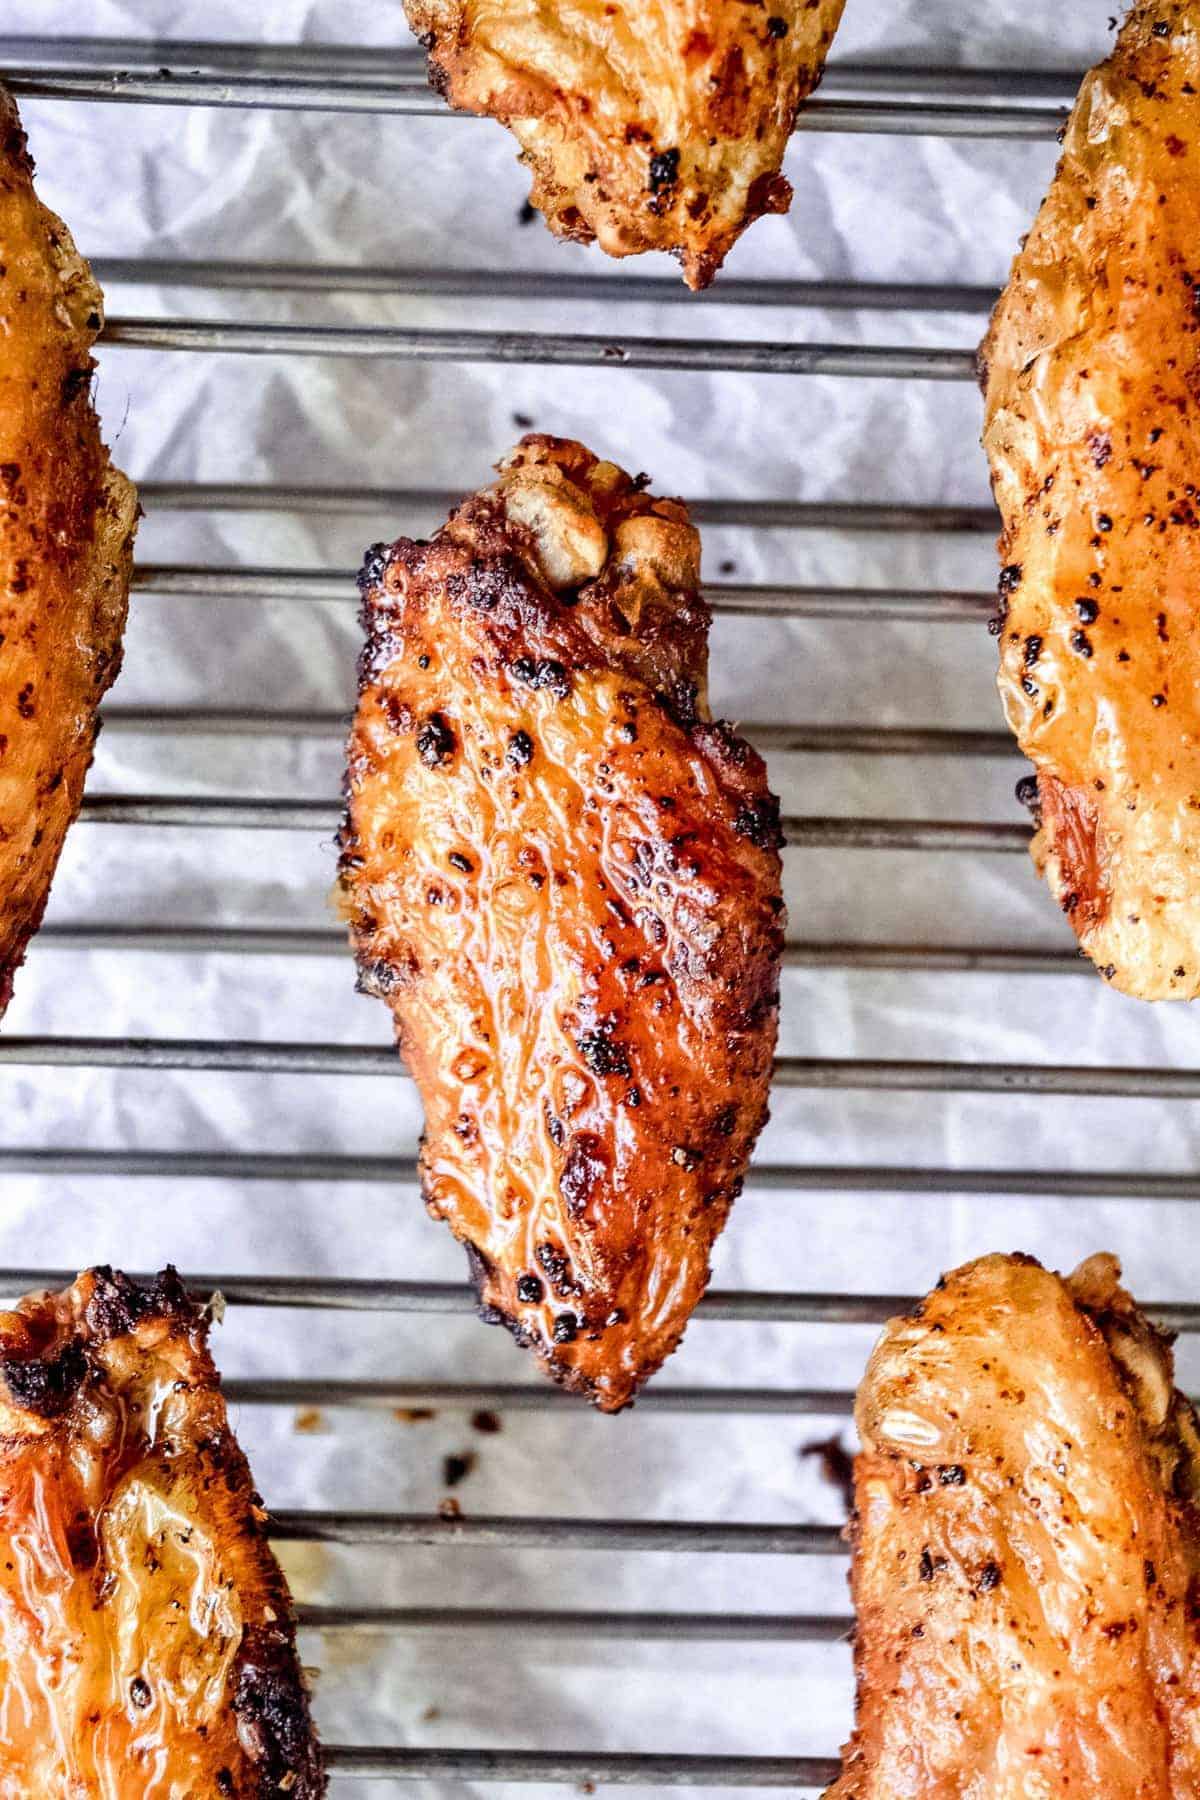 Baked chicken wings on a cooling rack